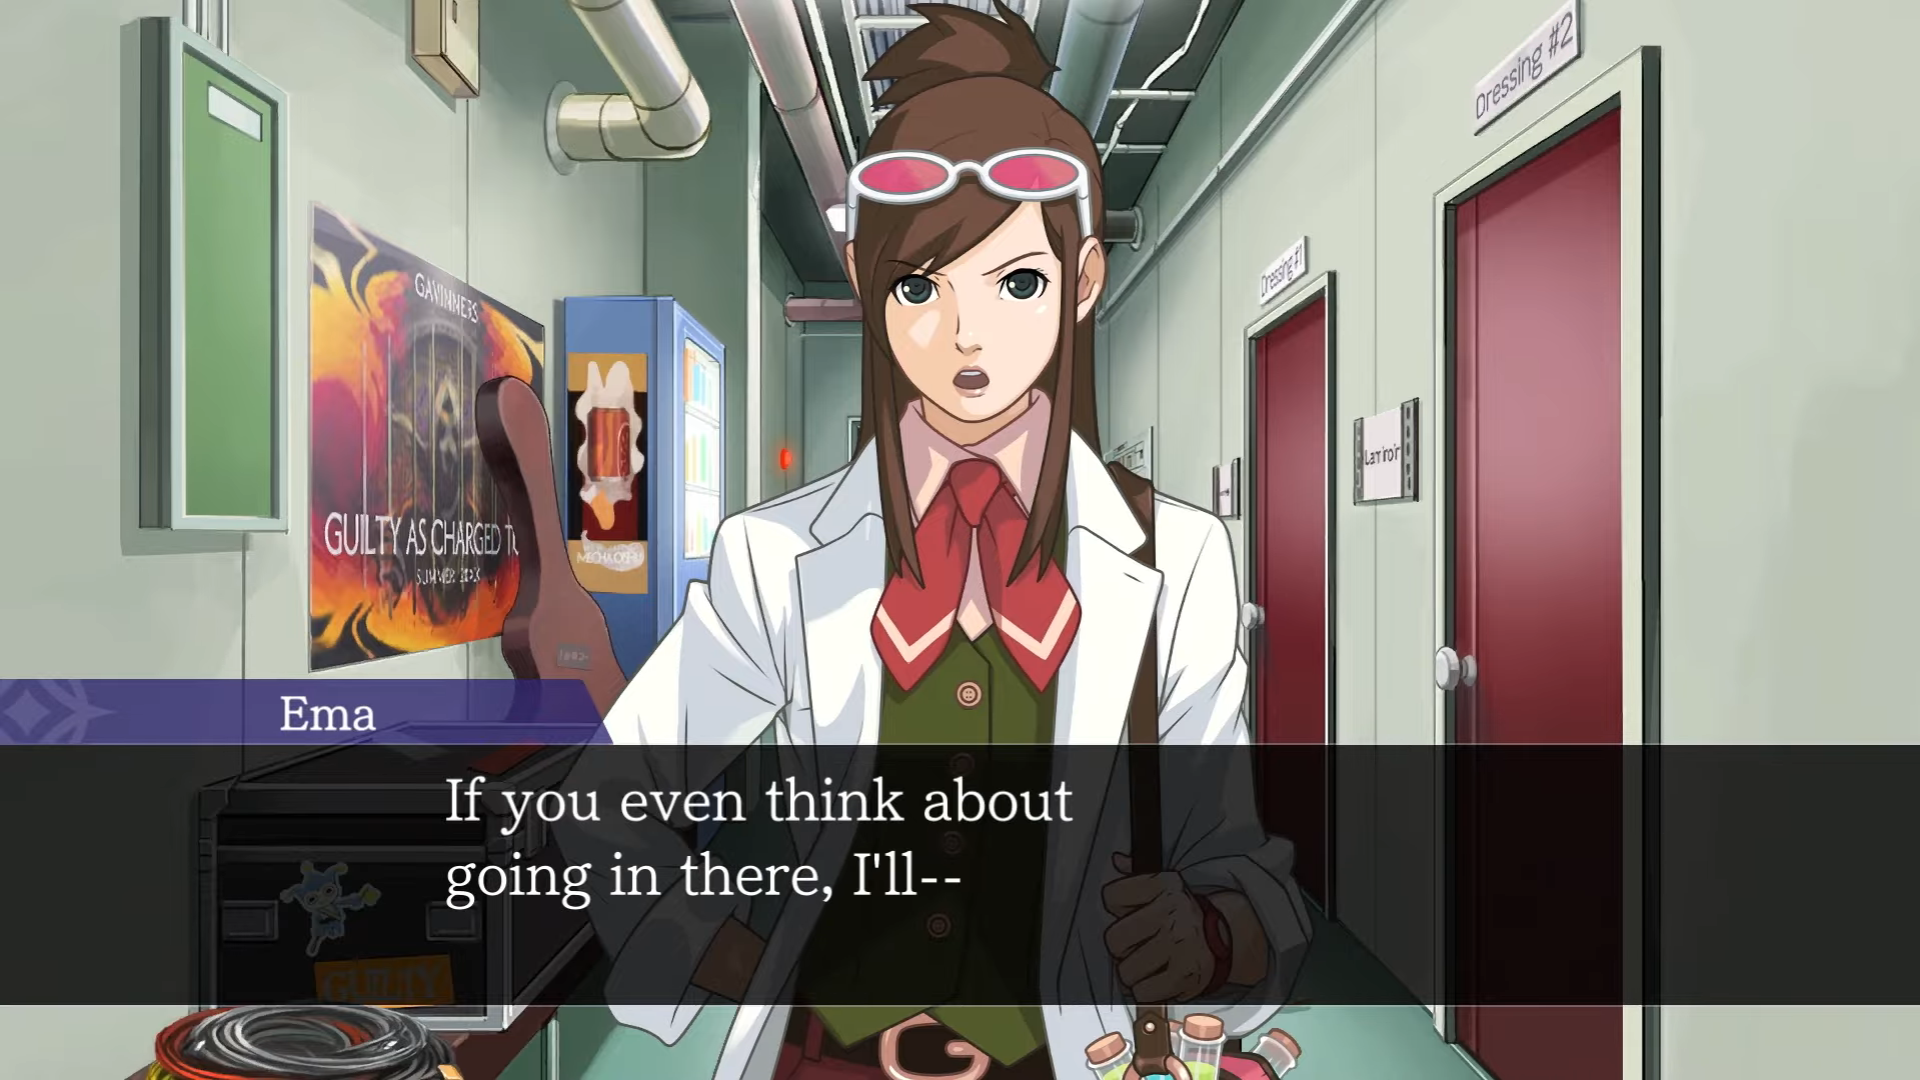 New Apollo Justice: Ace Attorney Trilogy English-Dubbed Trailer Introduces Third Case, “Turnabout Serenade”